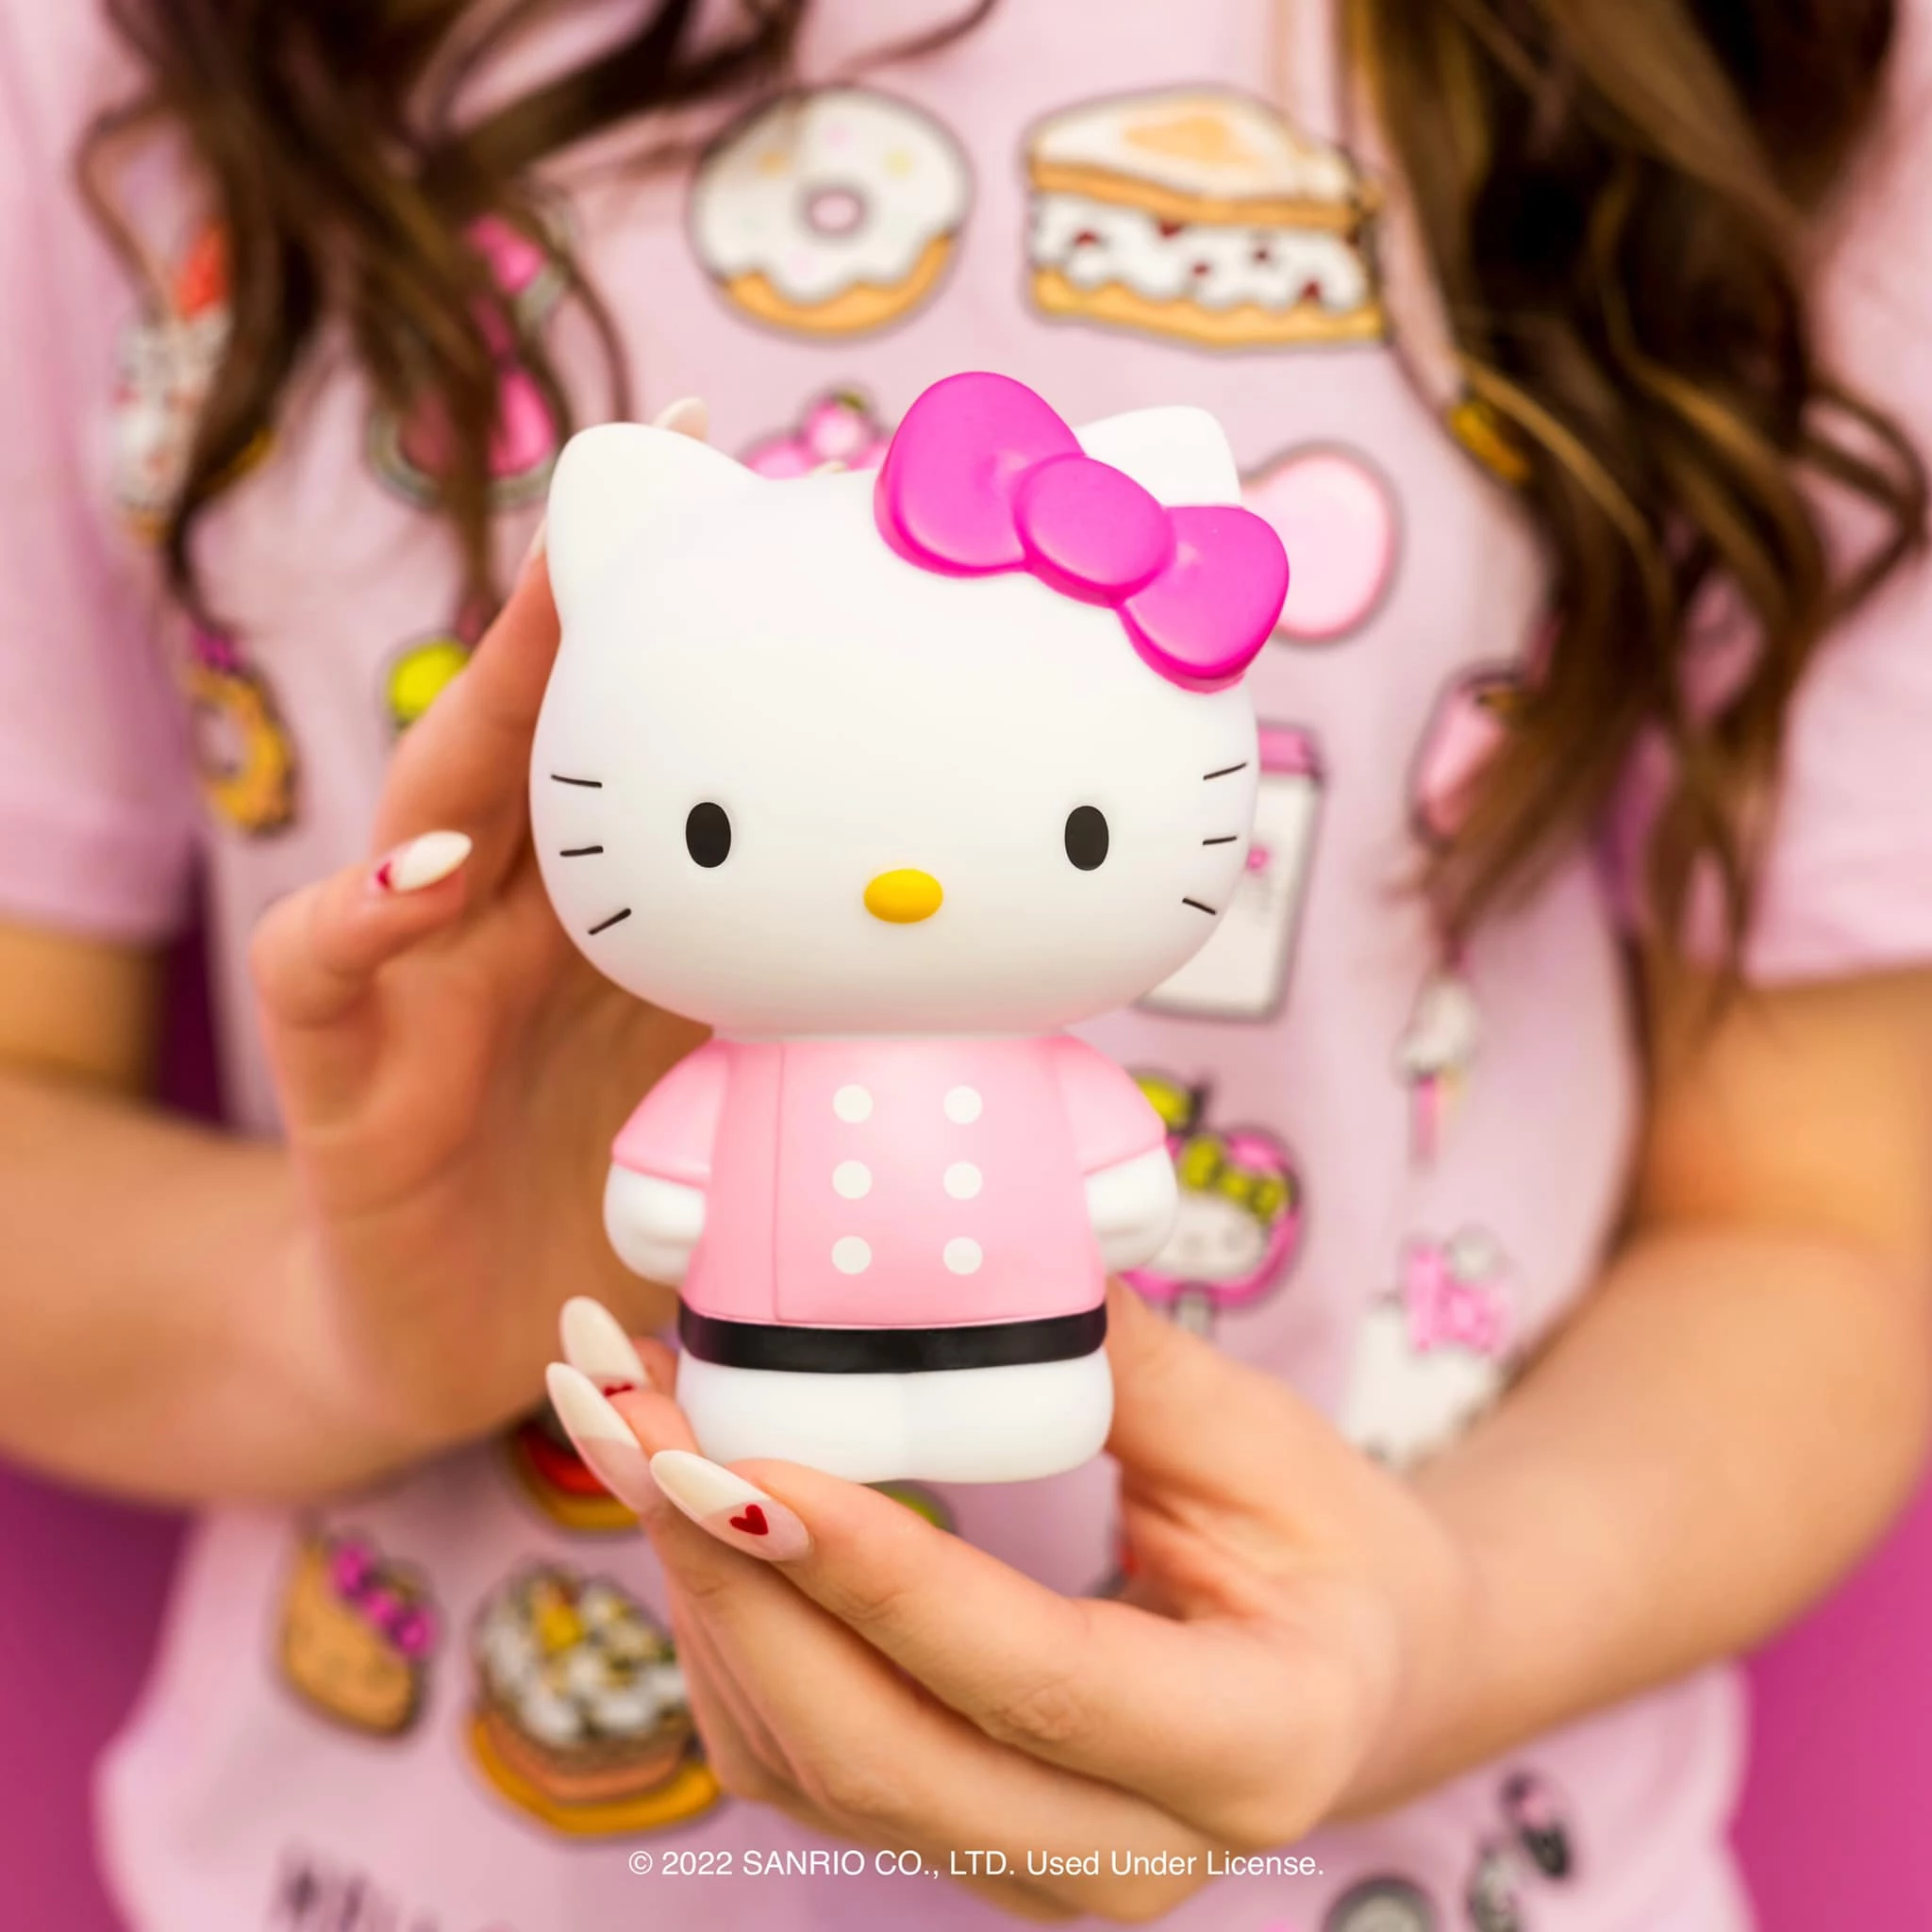 Sweets+Merch Hello Kitty Cafe Truck Will Be Serving Up in El Paso